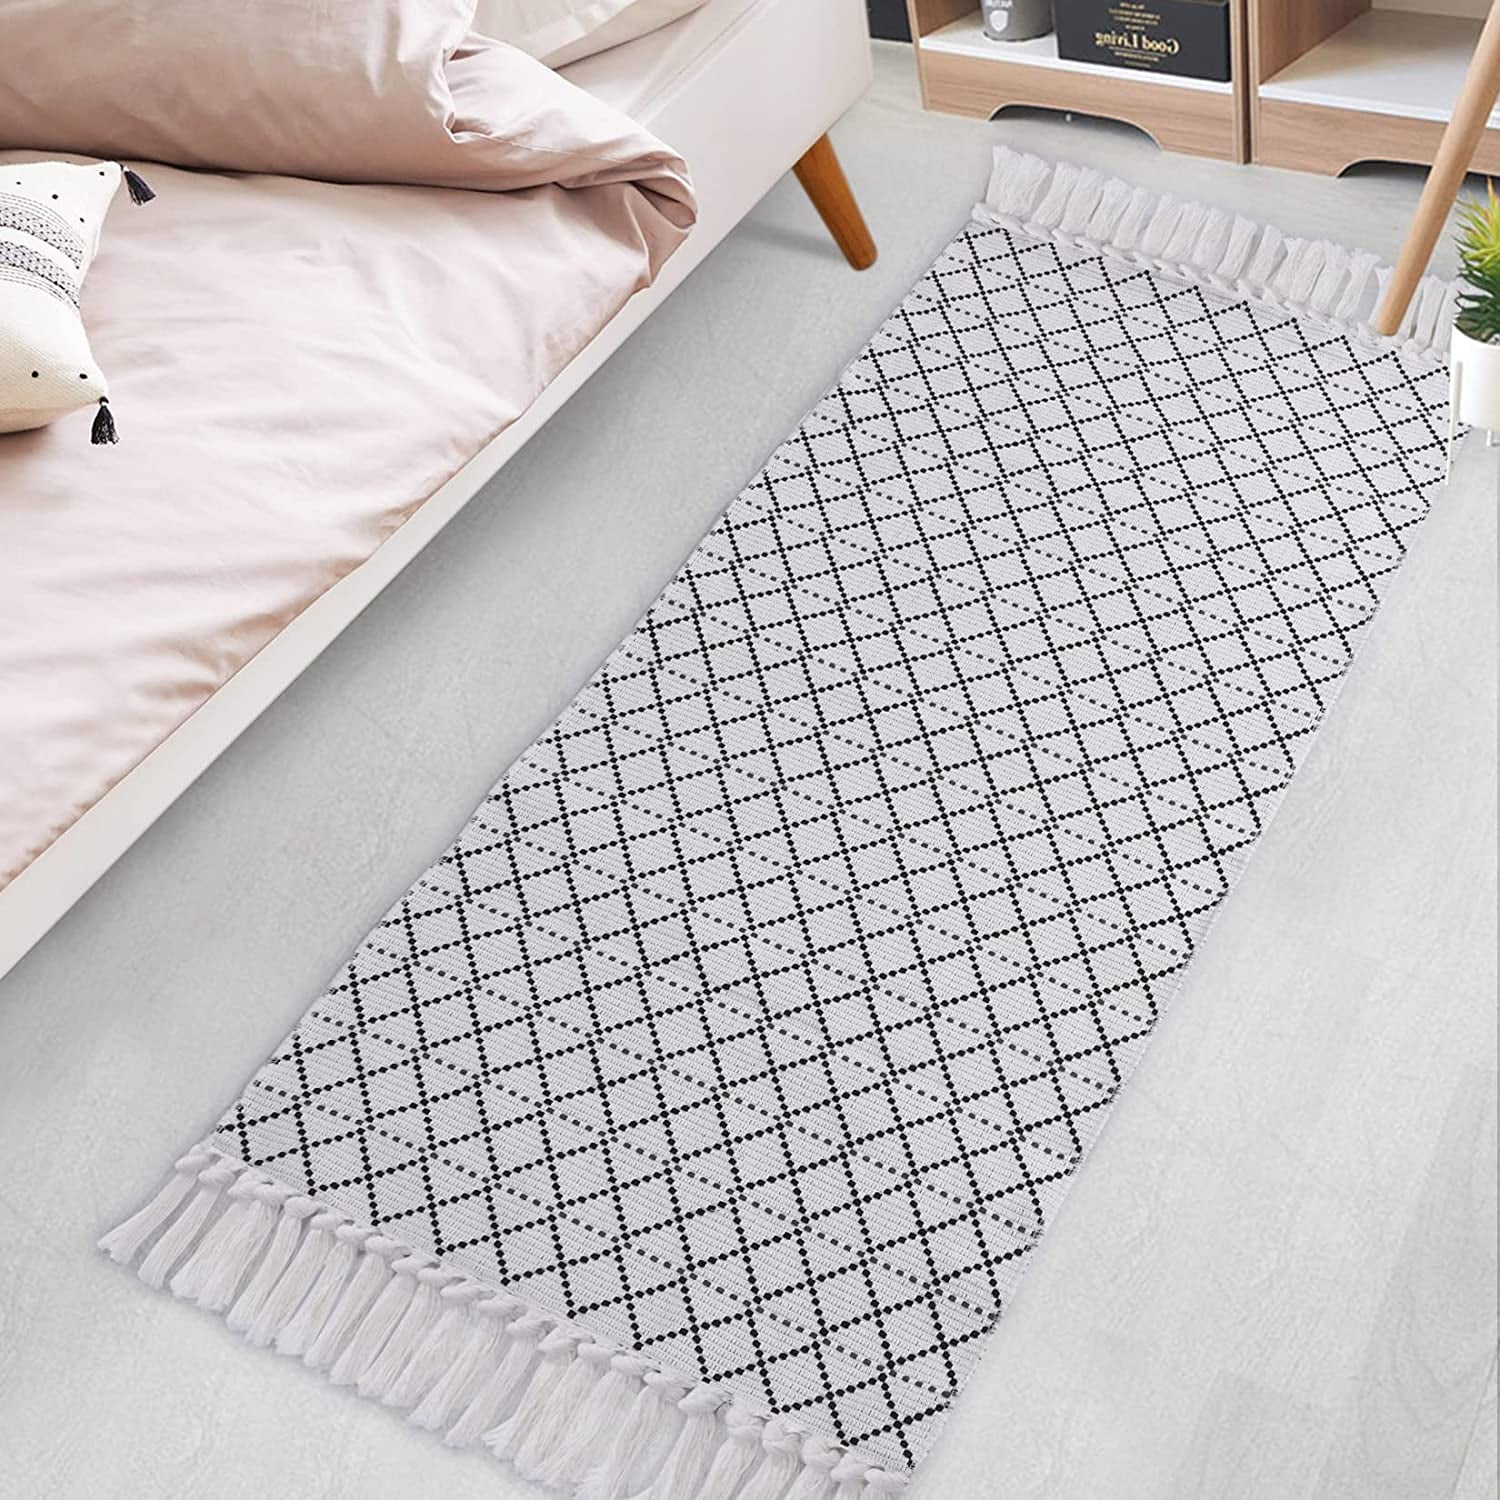 Lahome Boho Kitchen Runner, 2x4.3 Bathroom Runner Rug Lightweight Entryway  Rug Woven Cotton Throw Mat with Tassels, Farmhouse Non-Shedding Washable